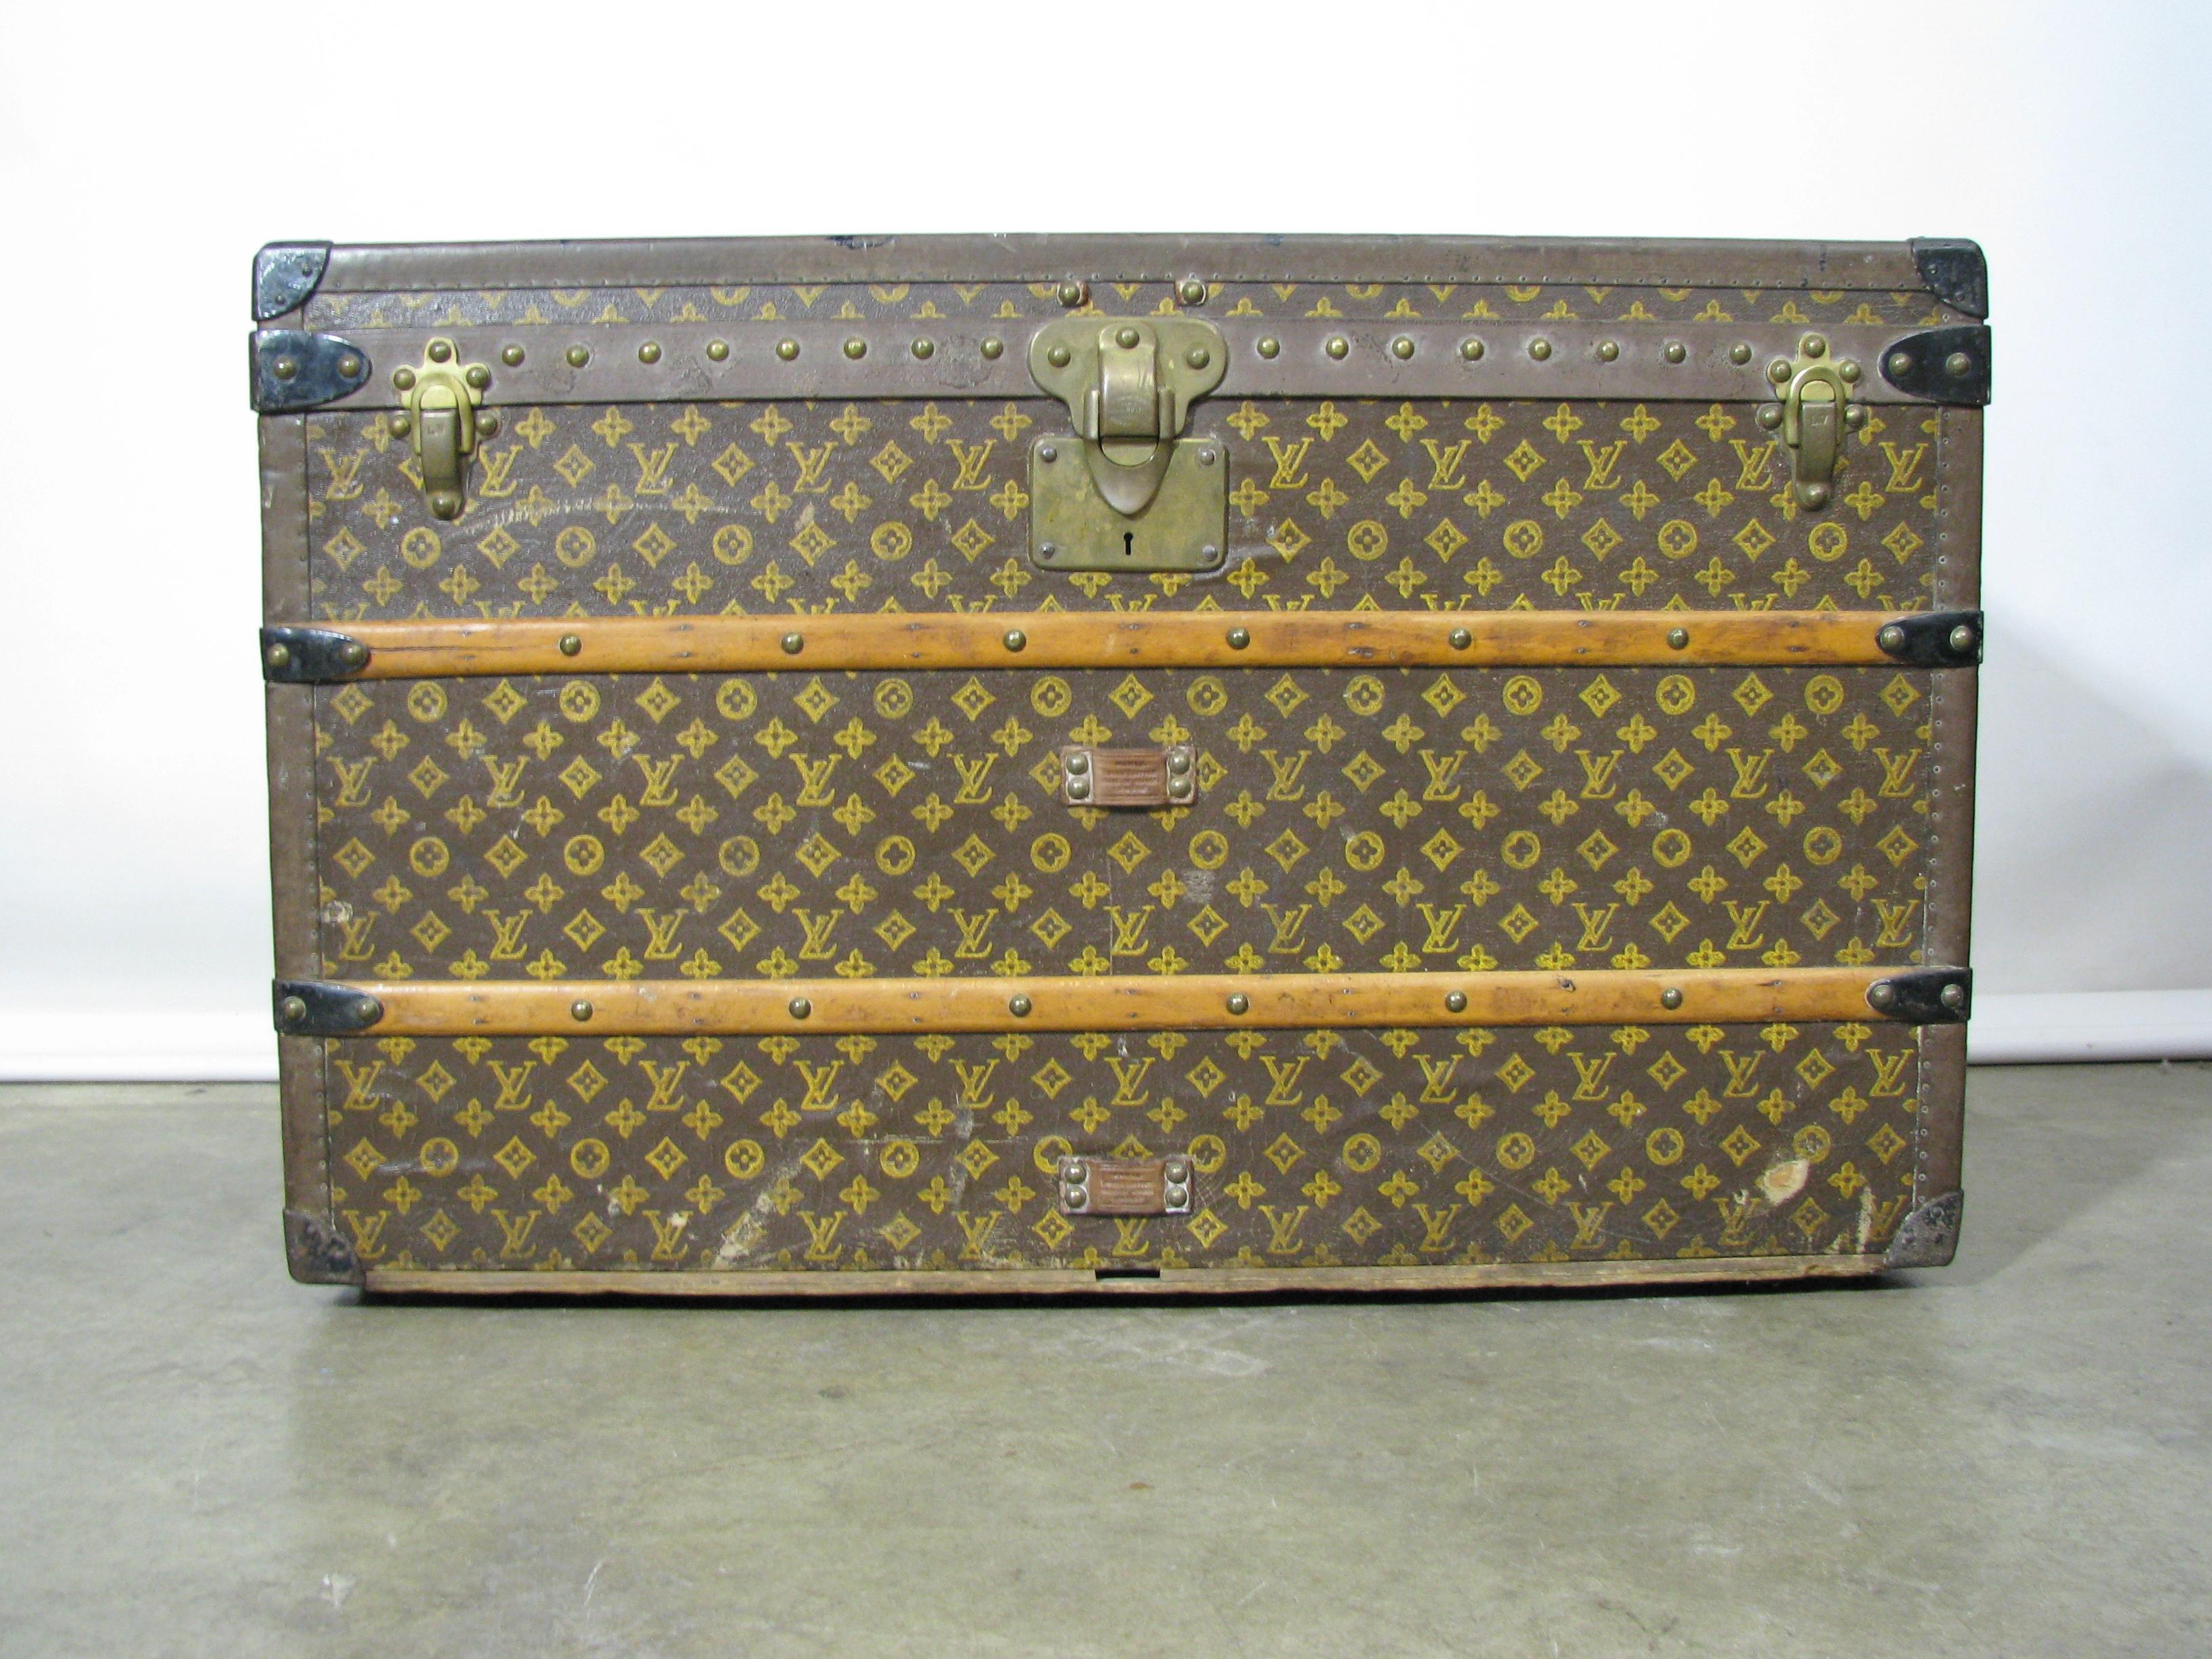 Late 1920s Louis Vuitton steamer trunk with stenciled monogram canvas. It features solid brass hardware, latches and locks - and the 